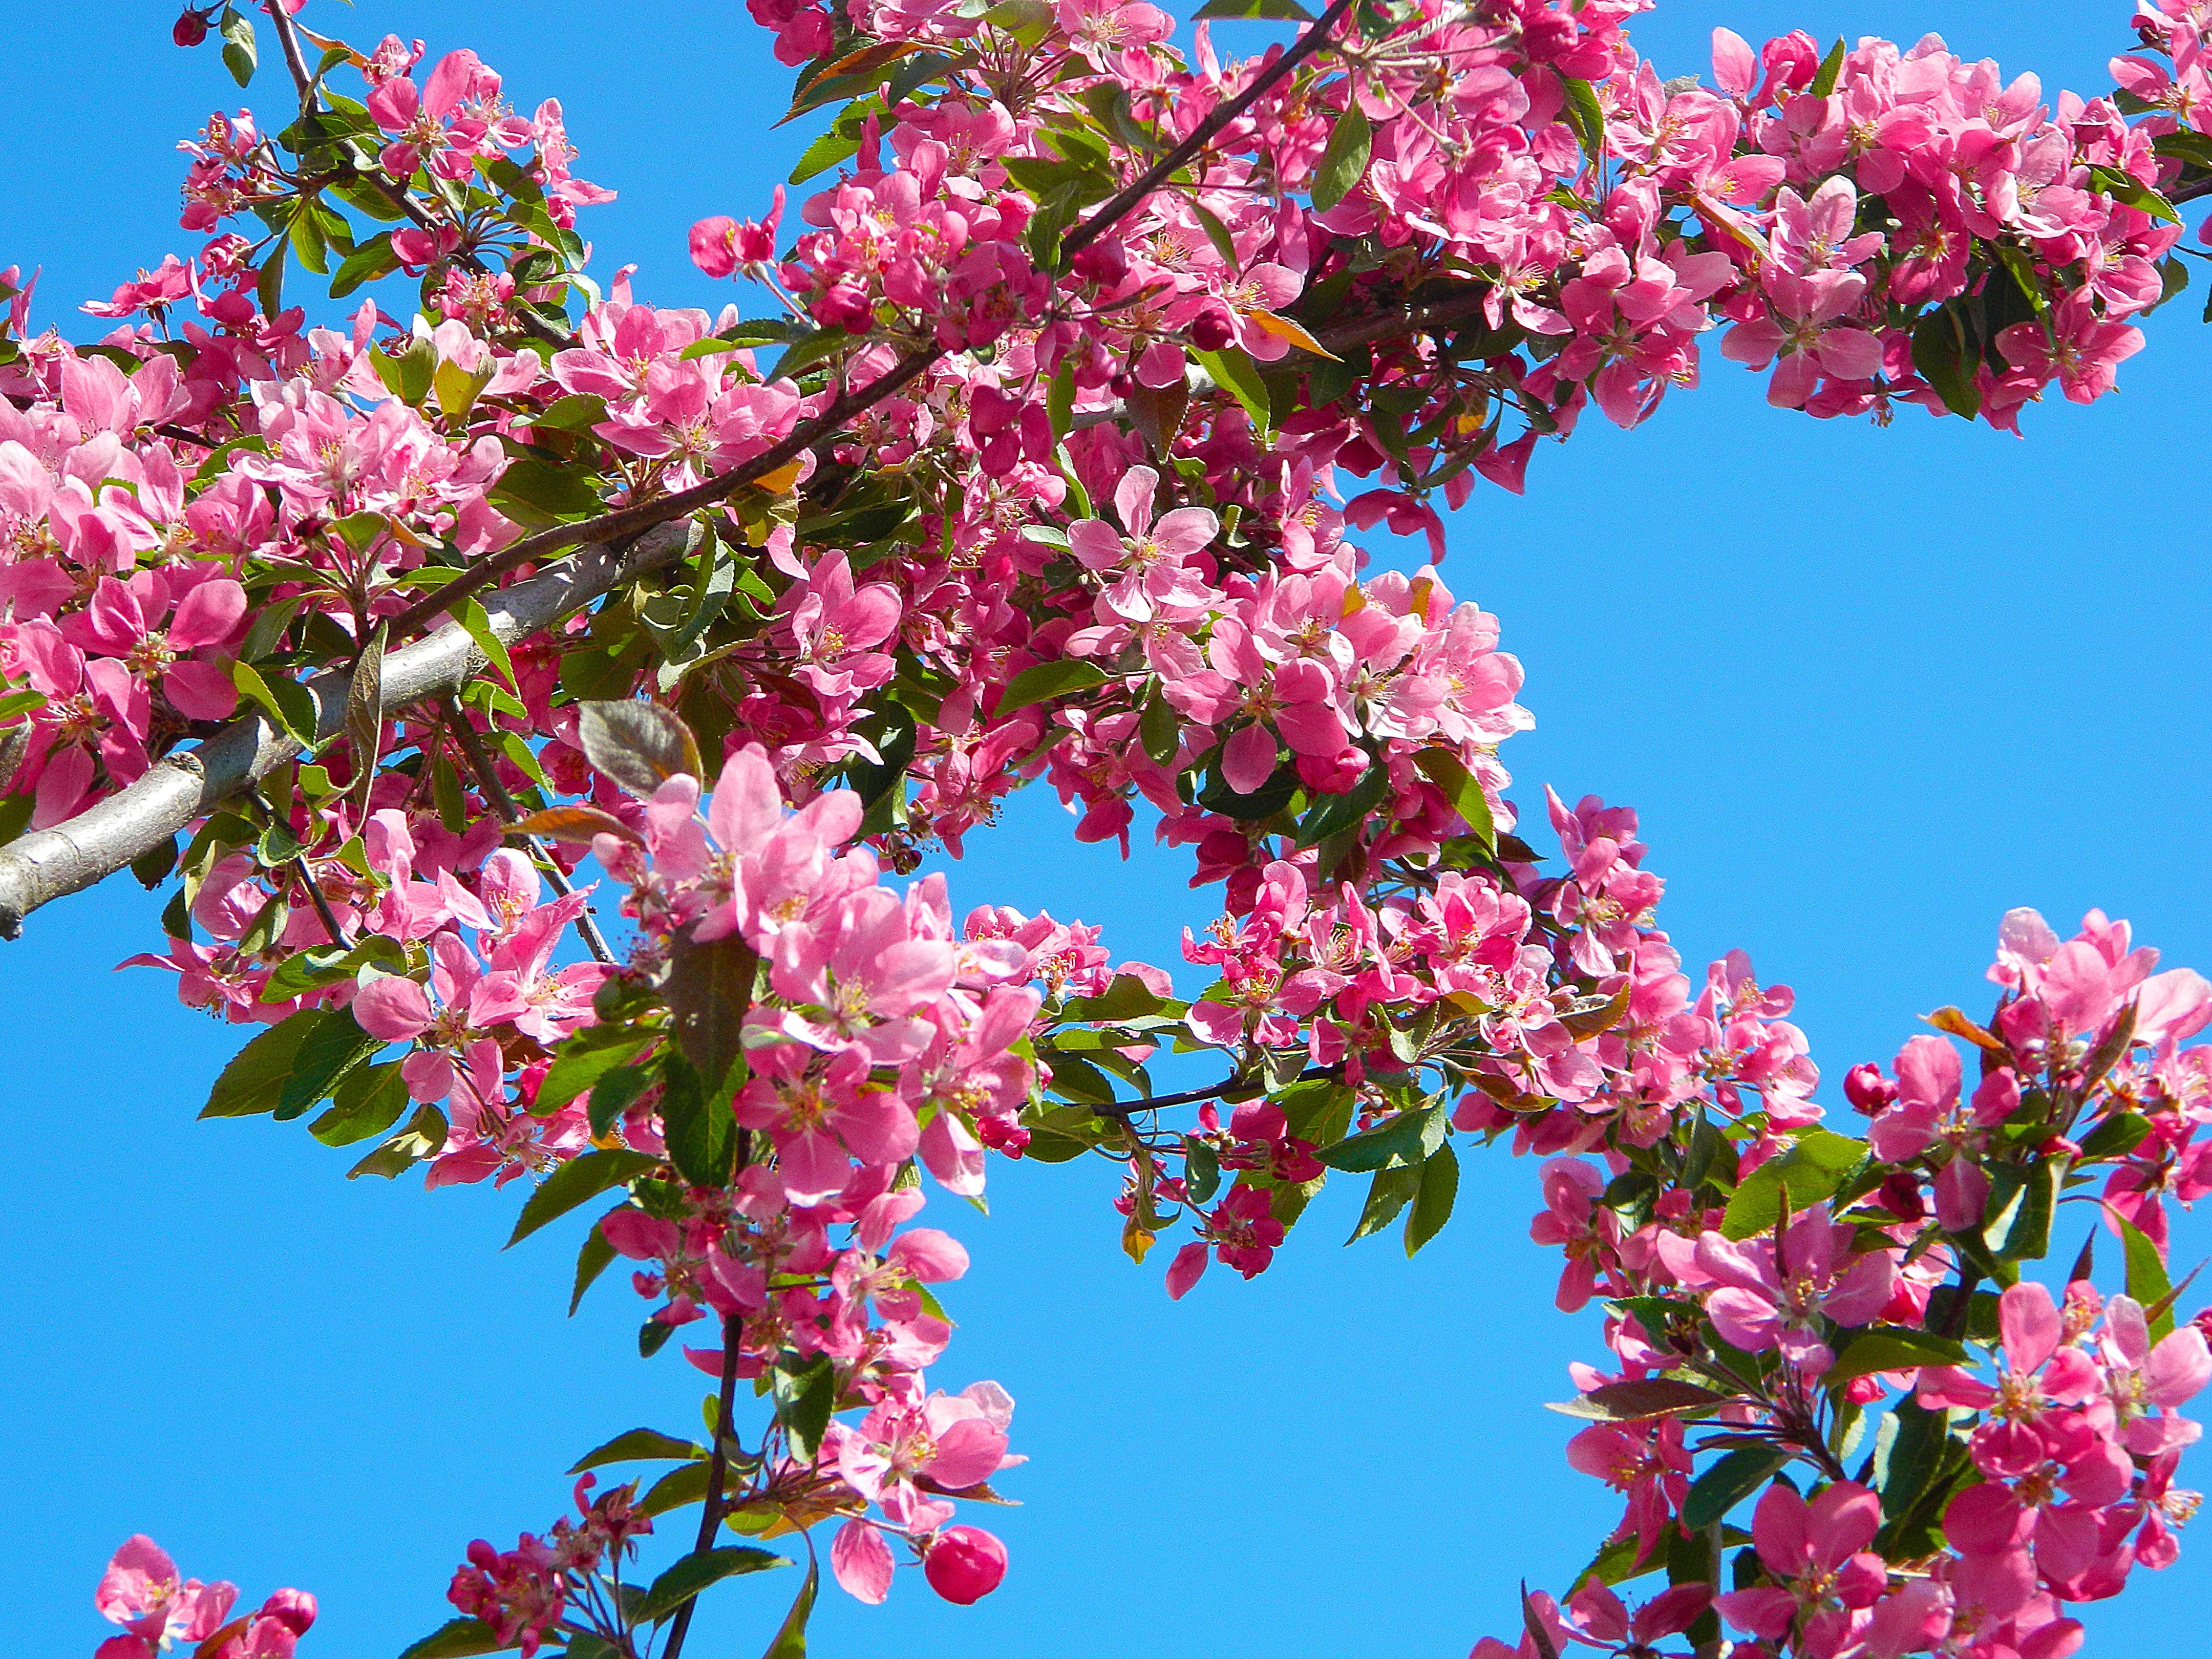 Pink flowers on tree branch during daytime photo